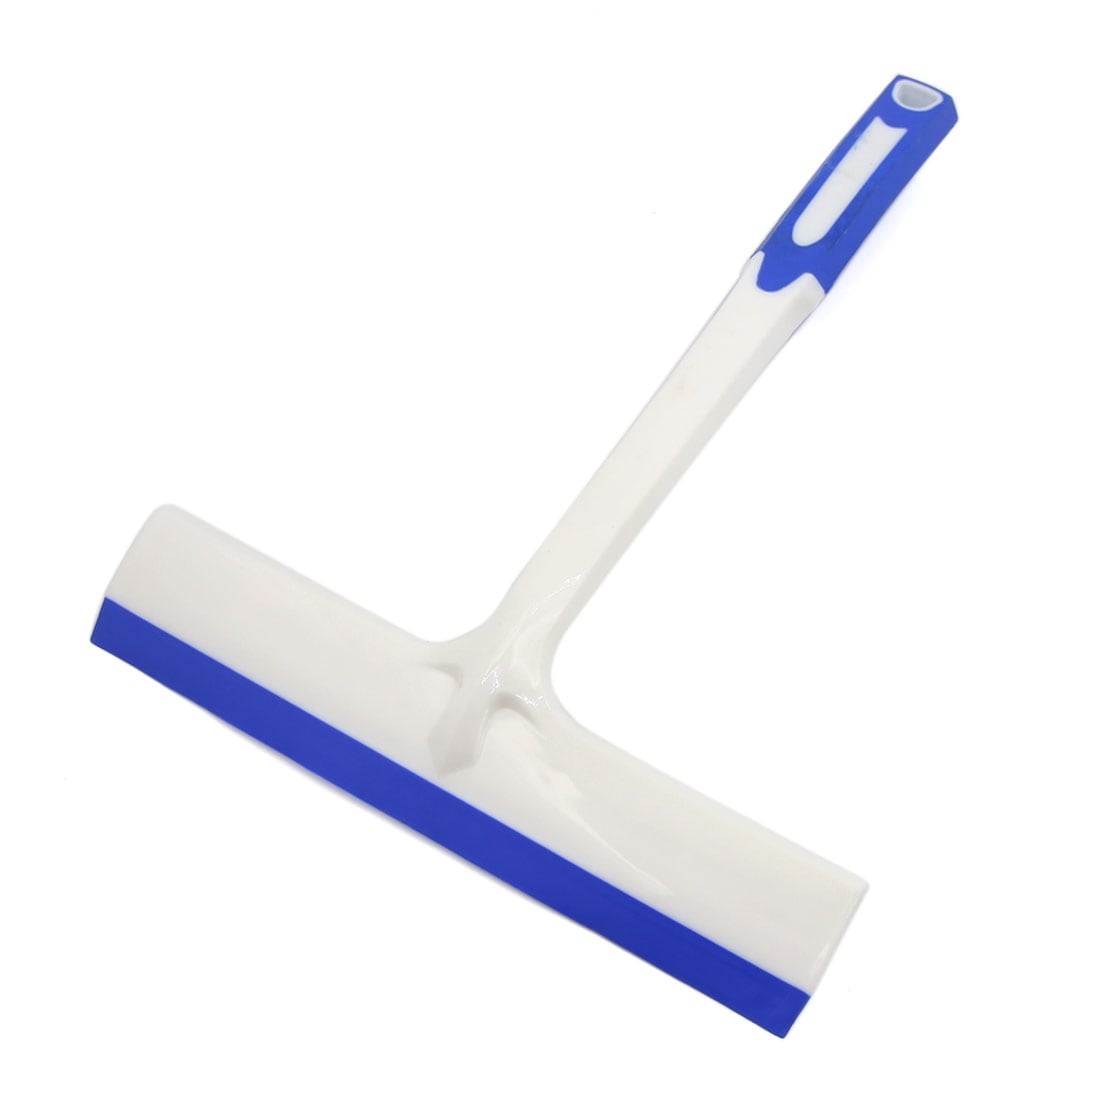 https://ak1.ostkcdn.com/images/products/is/images/direct/e912d397181f518f32a657700d93cb9847a17574/Blue-White-Rubber-Blade-Plastic-Handle-Car-Windscreen-Film-Scraper-Cleaning-Tool.jpg